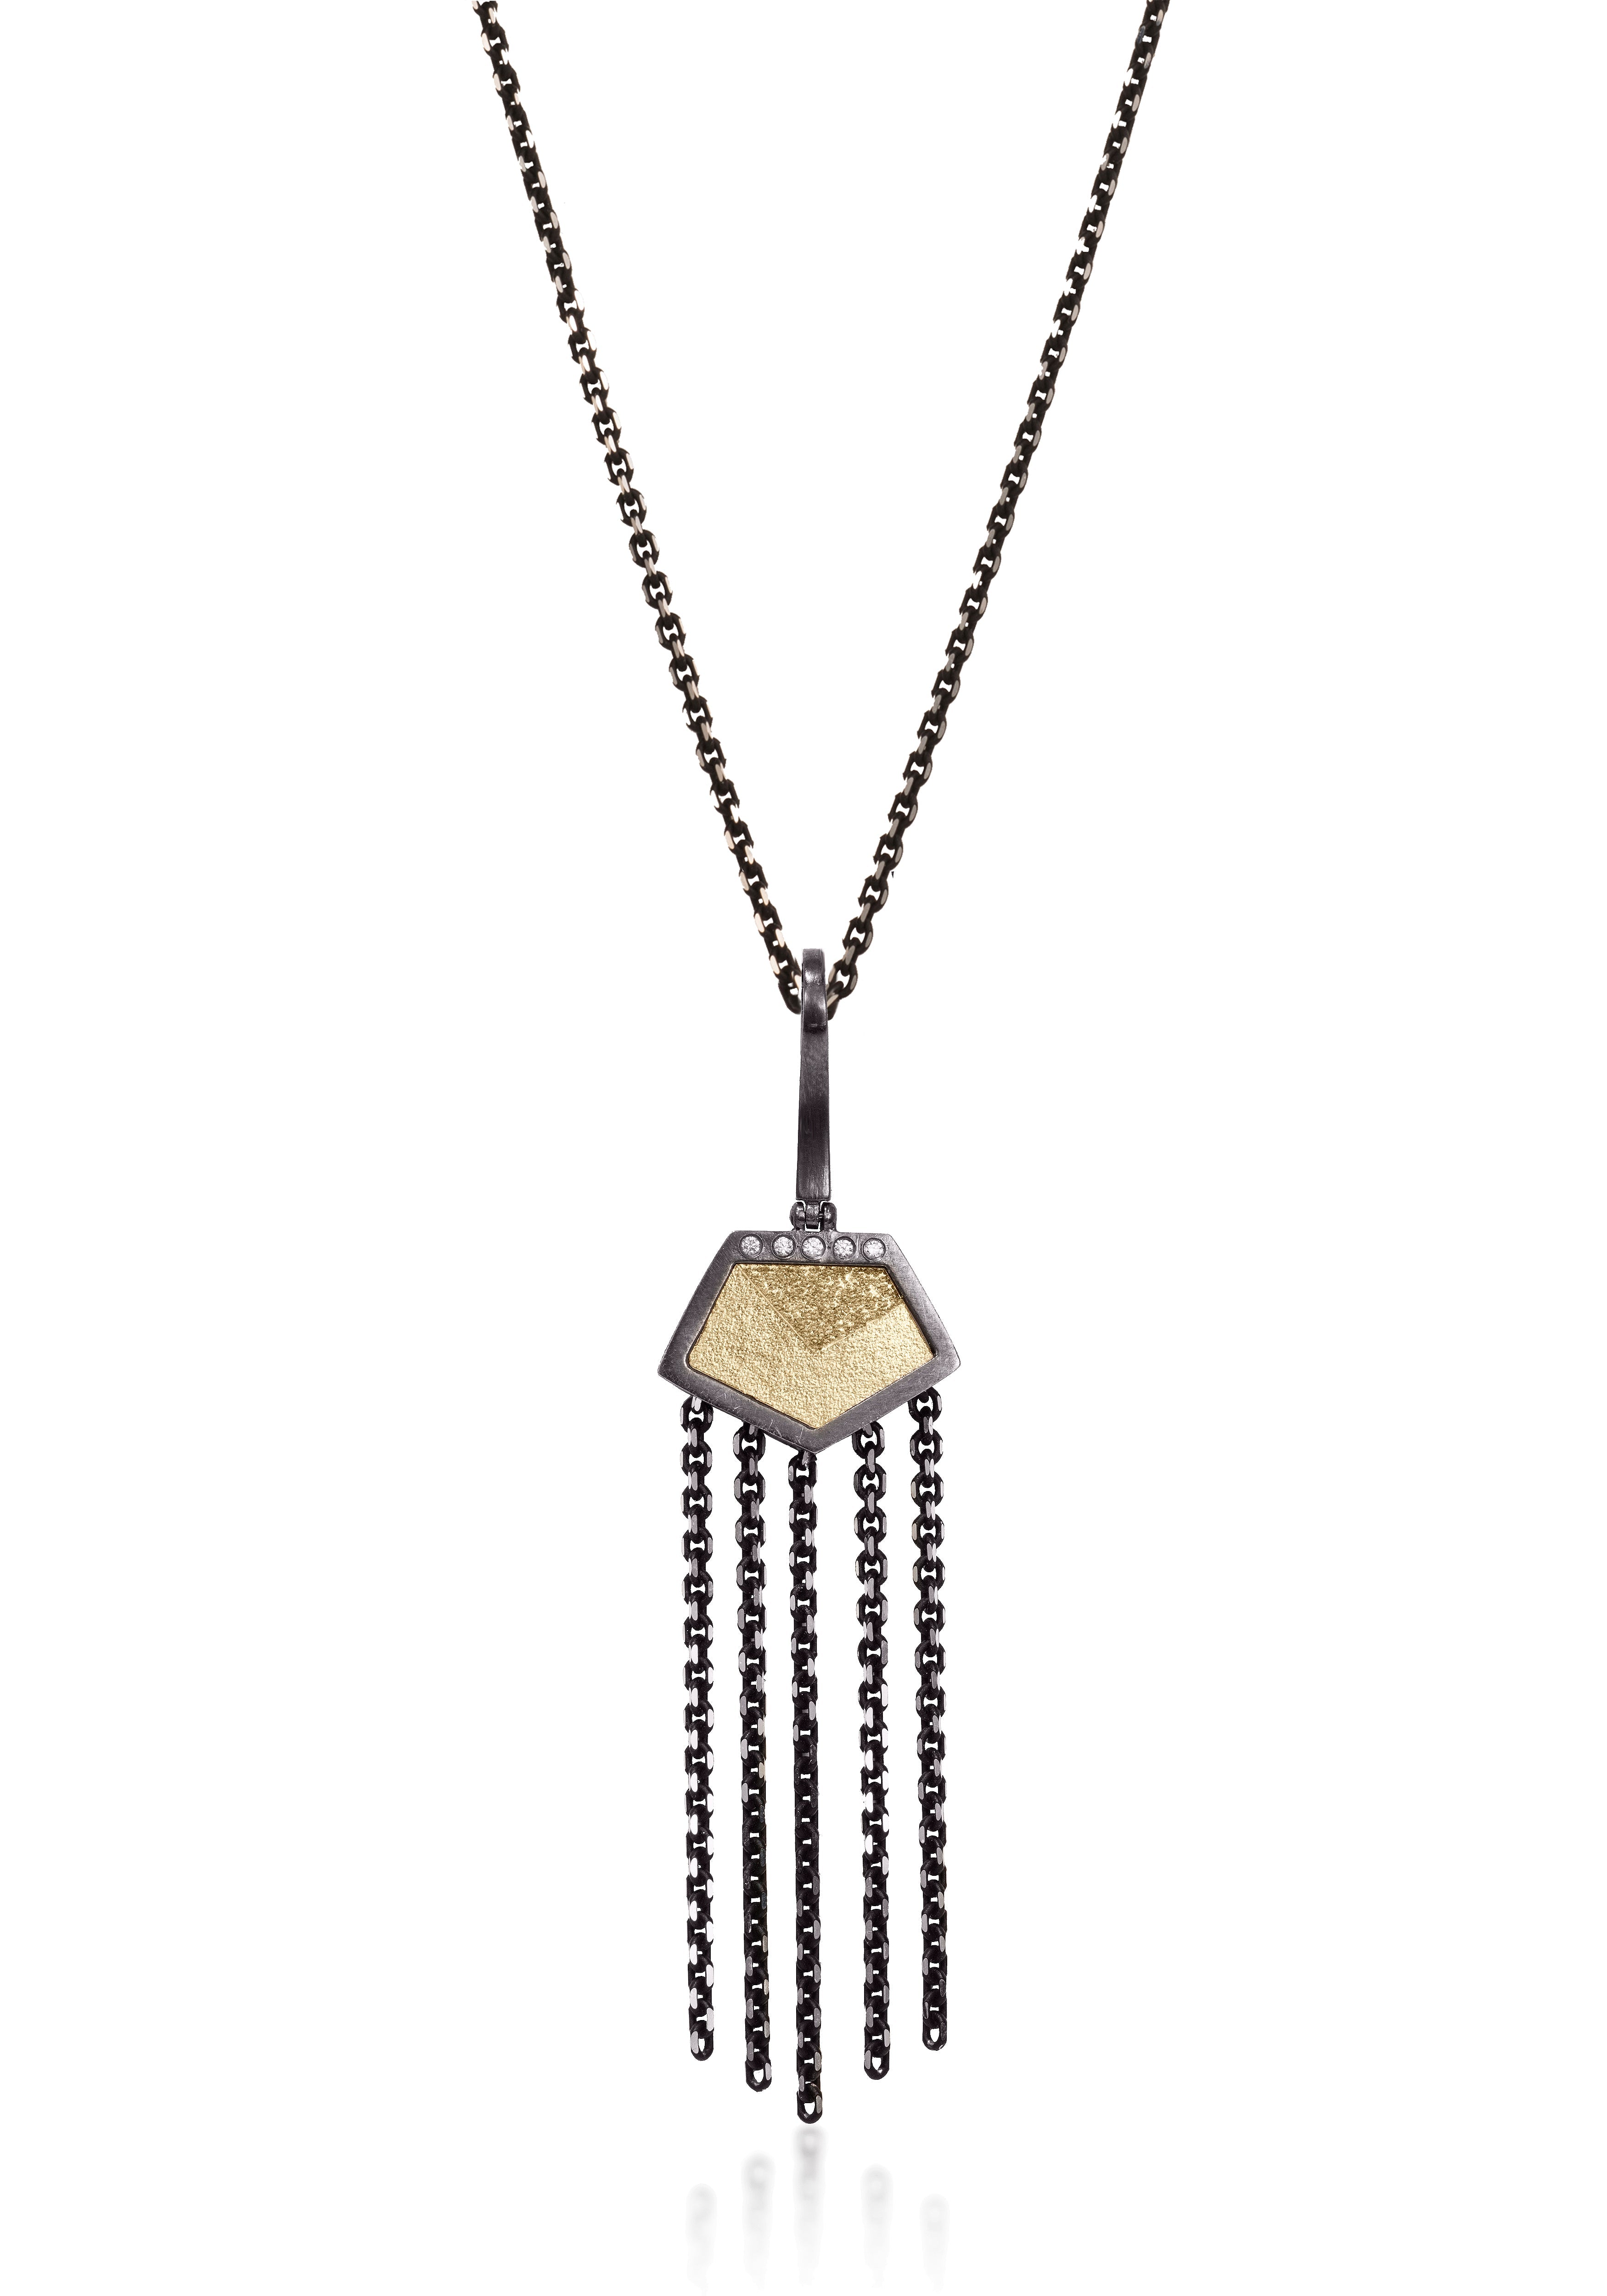 This oxidized sterling silver and richly textured 18k bimetal pendant is flush set with ideal cut white diamonds.  Hinged bail of oxidized sterling available as a fixed or enhancer bail. Accent facet glitters with the texture of diamond facets, individually scored and hand textured, with dangling diamond cut fringe. Size extra small.  0.0345 tcw